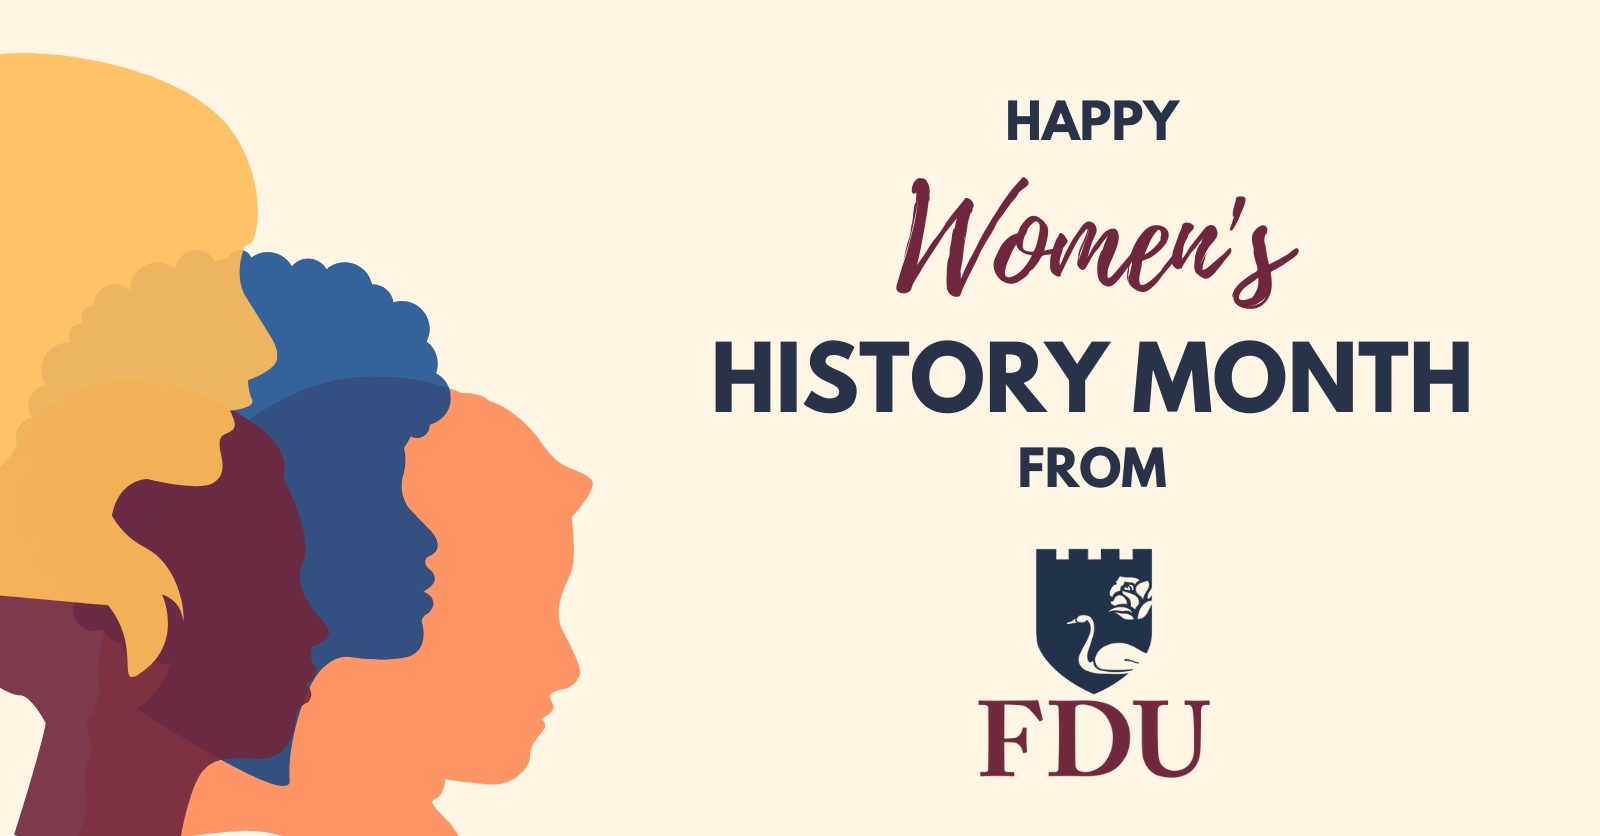 silhouettes of women. graphic reads "happy women's history month from FDU"